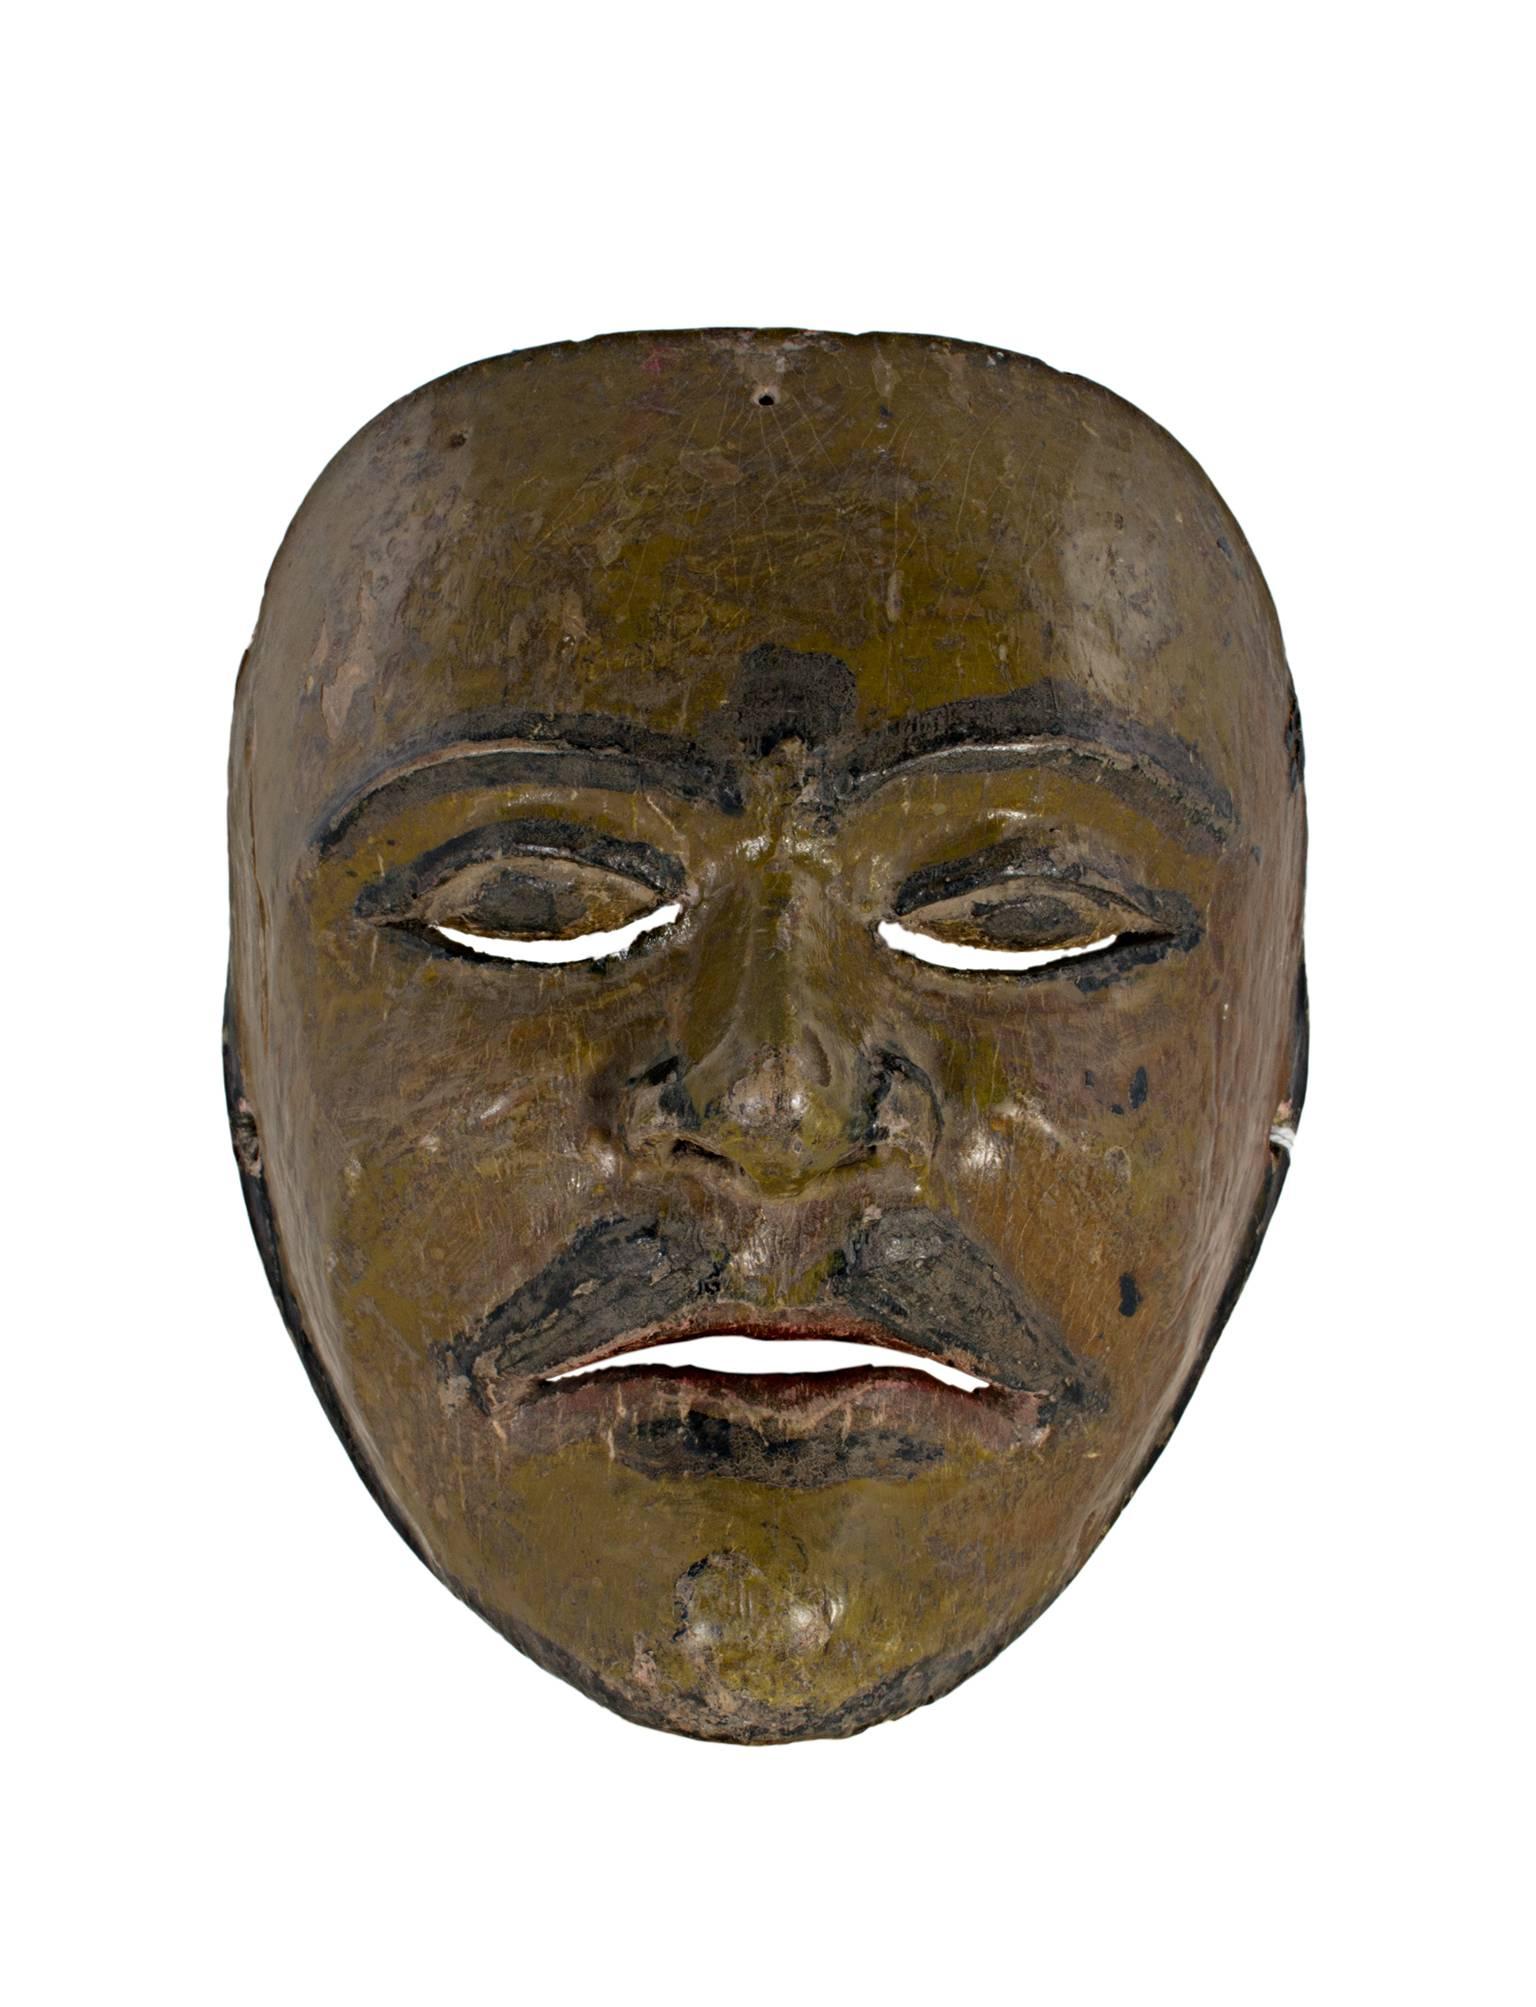 "Indonesian Mask of a Western Character, " Wood painted Mustard, Lime, & Green